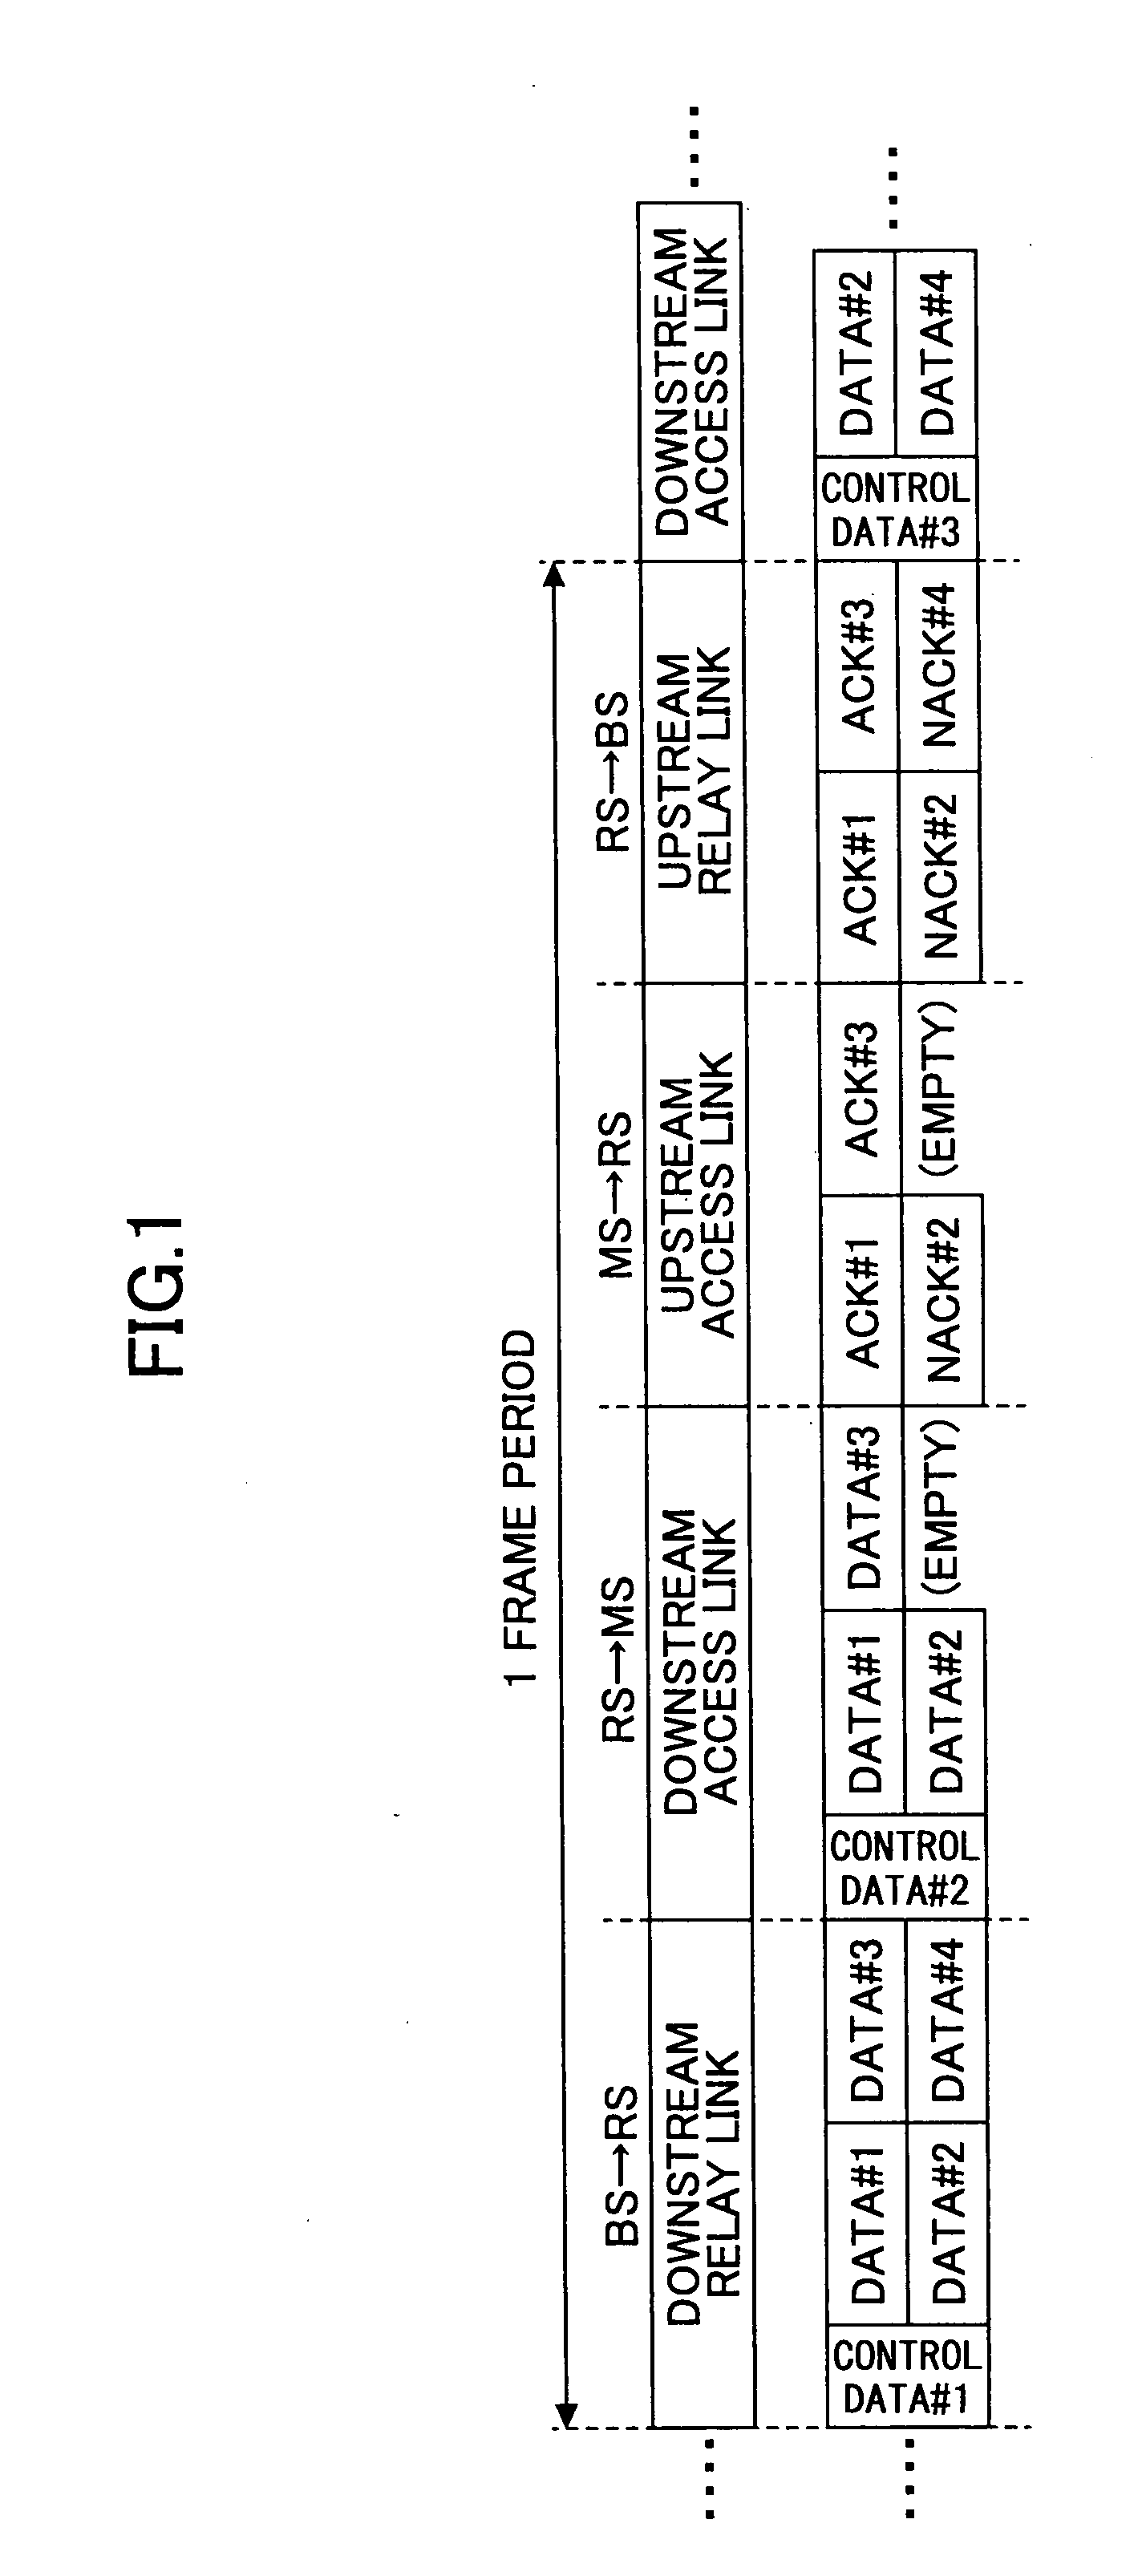 Re-transmission control method and relay station apparatus in a relay communication system